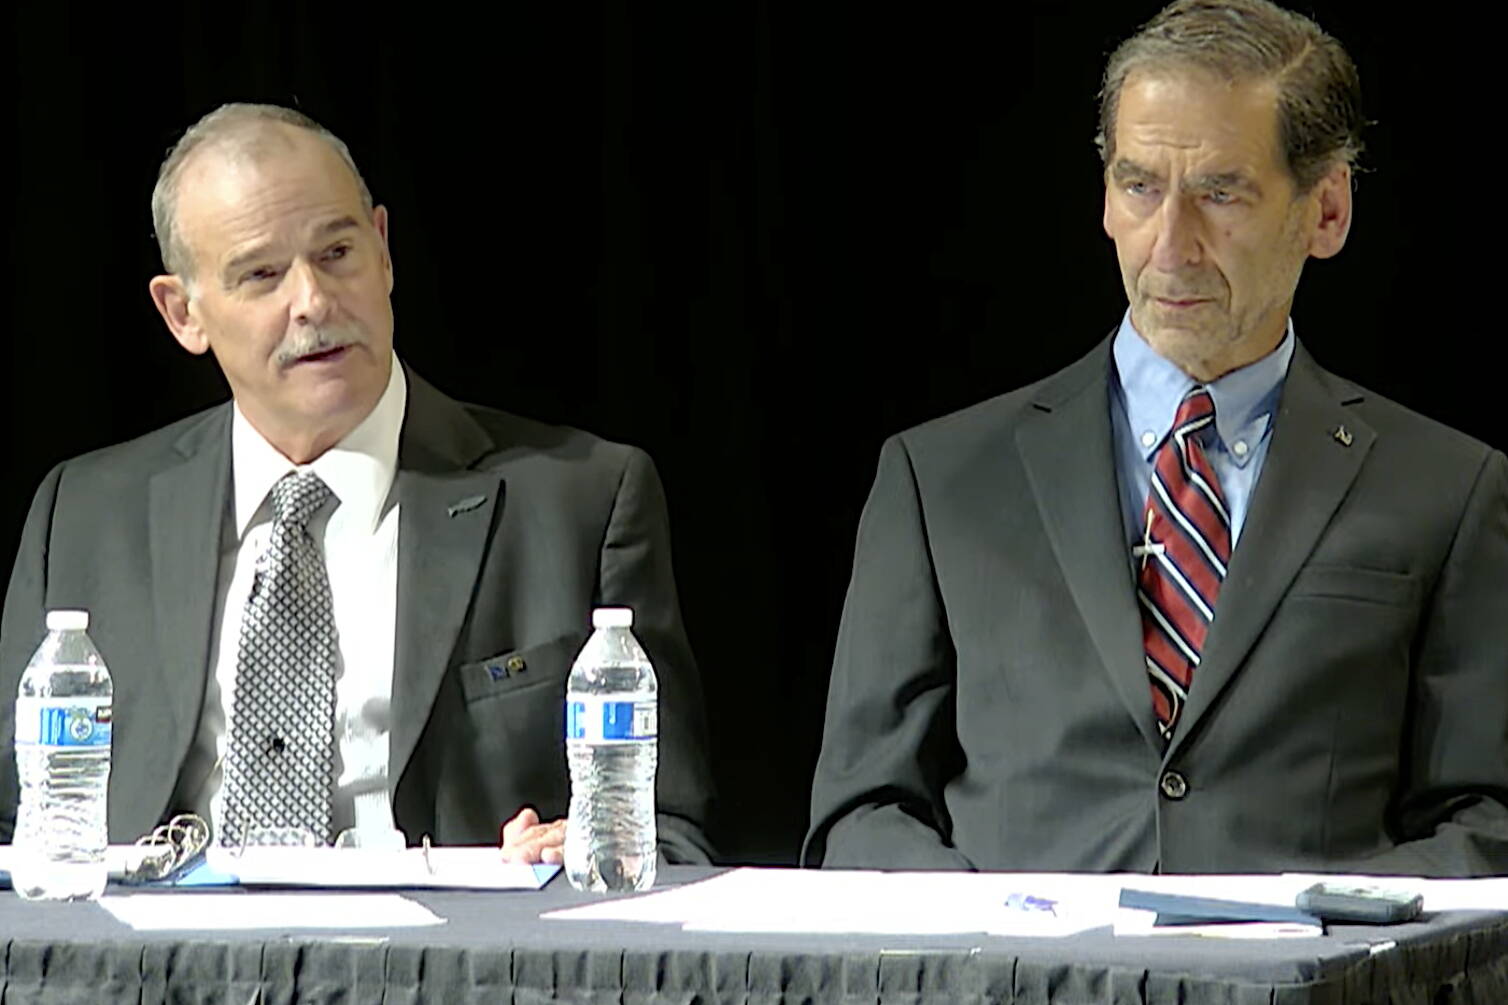 Bob Bird, left, chairman of the Alaskan Independence Party, and former Lt. Gov. Loren Leman make the case in favor of a state constitutional convention during a debate in Anchorage broadcast Thursday by Alaska Public Media. (Screenshot from Alaska Public Media’s YouTube channel)